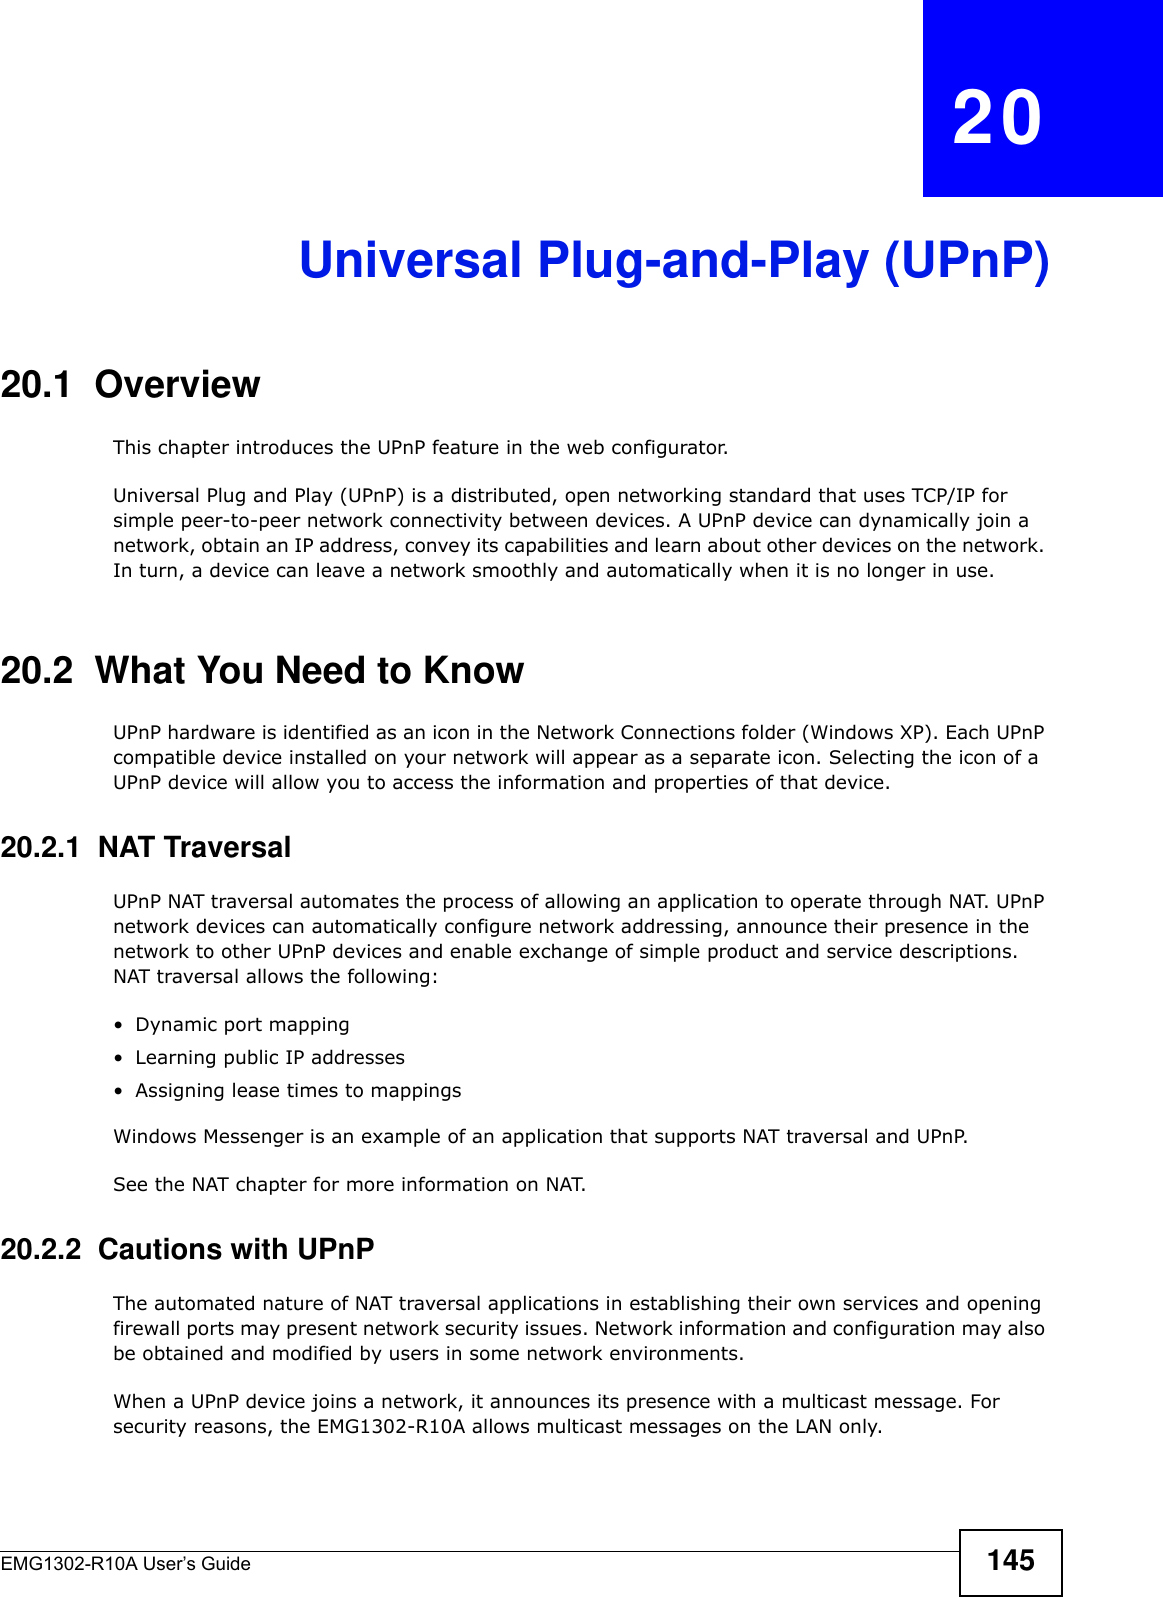 EMG1302-R10A User’s Guide 145CHAPTER   20Universal Plug-and-Play (UPnP)20.1  Overview This chapter introduces the UPnP feature in the web configurator.Universal Plug and Play (UPnP) is a distributed, open networking standard that uses TCP/IP for simple peer-to-peer network connectivity between devices. A UPnP device can dynamically join a network, obtain an IP address, convey its capabilities and learn about other devices on the network. In turn, a device can leave a network smoothly and automatically when it is no longer in use.20.2  What You Need to KnowUPnP hardware is identified as an icon in the Network Connections folder (Windows XP). Each UPnP compatible device installed on your network will appear as a separate icon. Selecting the icon of a UPnP device will allow you to access the information and properties of that device. 20.2.1  NAT TraversalUPnP NAT traversal automates the process of allowing an application to operate through NAT. UPnP network devices can automatically configure network addressing, announce their presence in the network to other UPnP devices and enable exchange of simple product and service descriptions. NAT traversal allows the following:• Dynamic port mapping• Learning public IP addresses• Assigning lease times to mappingsWindows Messenger is an example of an application that supports NAT traversal and UPnP. See the NAT chapter for more information on NAT.20.2.2  Cautions with UPnPThe automated nature of NAT traversal applications in establishing their own services and opening firewall ports may present network security issues. Network information and configuration may also be obtained and modified by users in some network environments. When a UPnP device joins a network, it announces its presence with a multicast message. For security reasons, the EMG1302-R10A allows multicast messages on the LAN only.